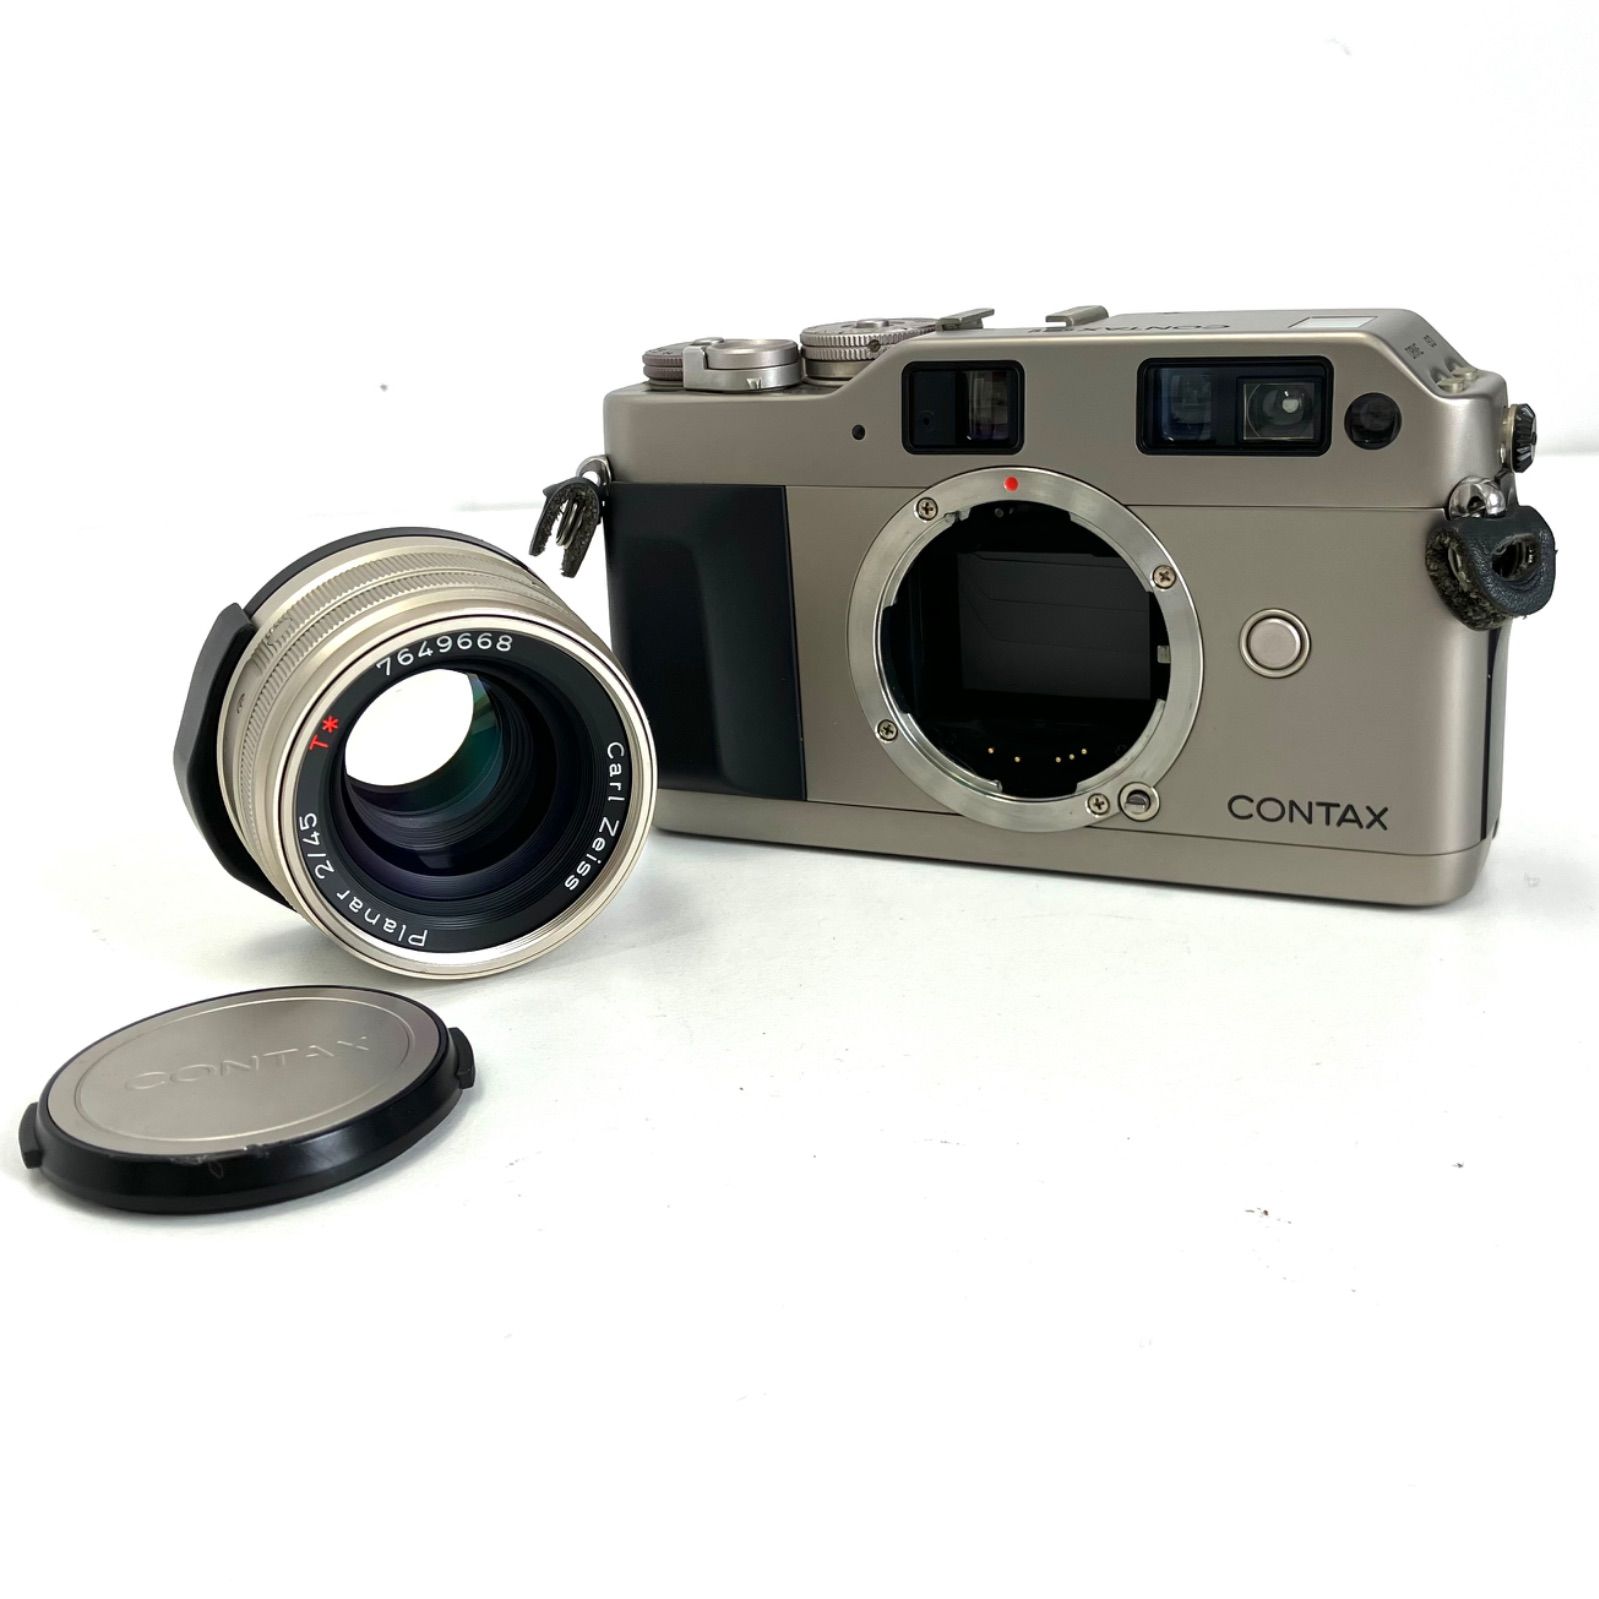 10185】 CONTAX G1 / Carl zeiss Planar F2 45mm レンズセット 美品